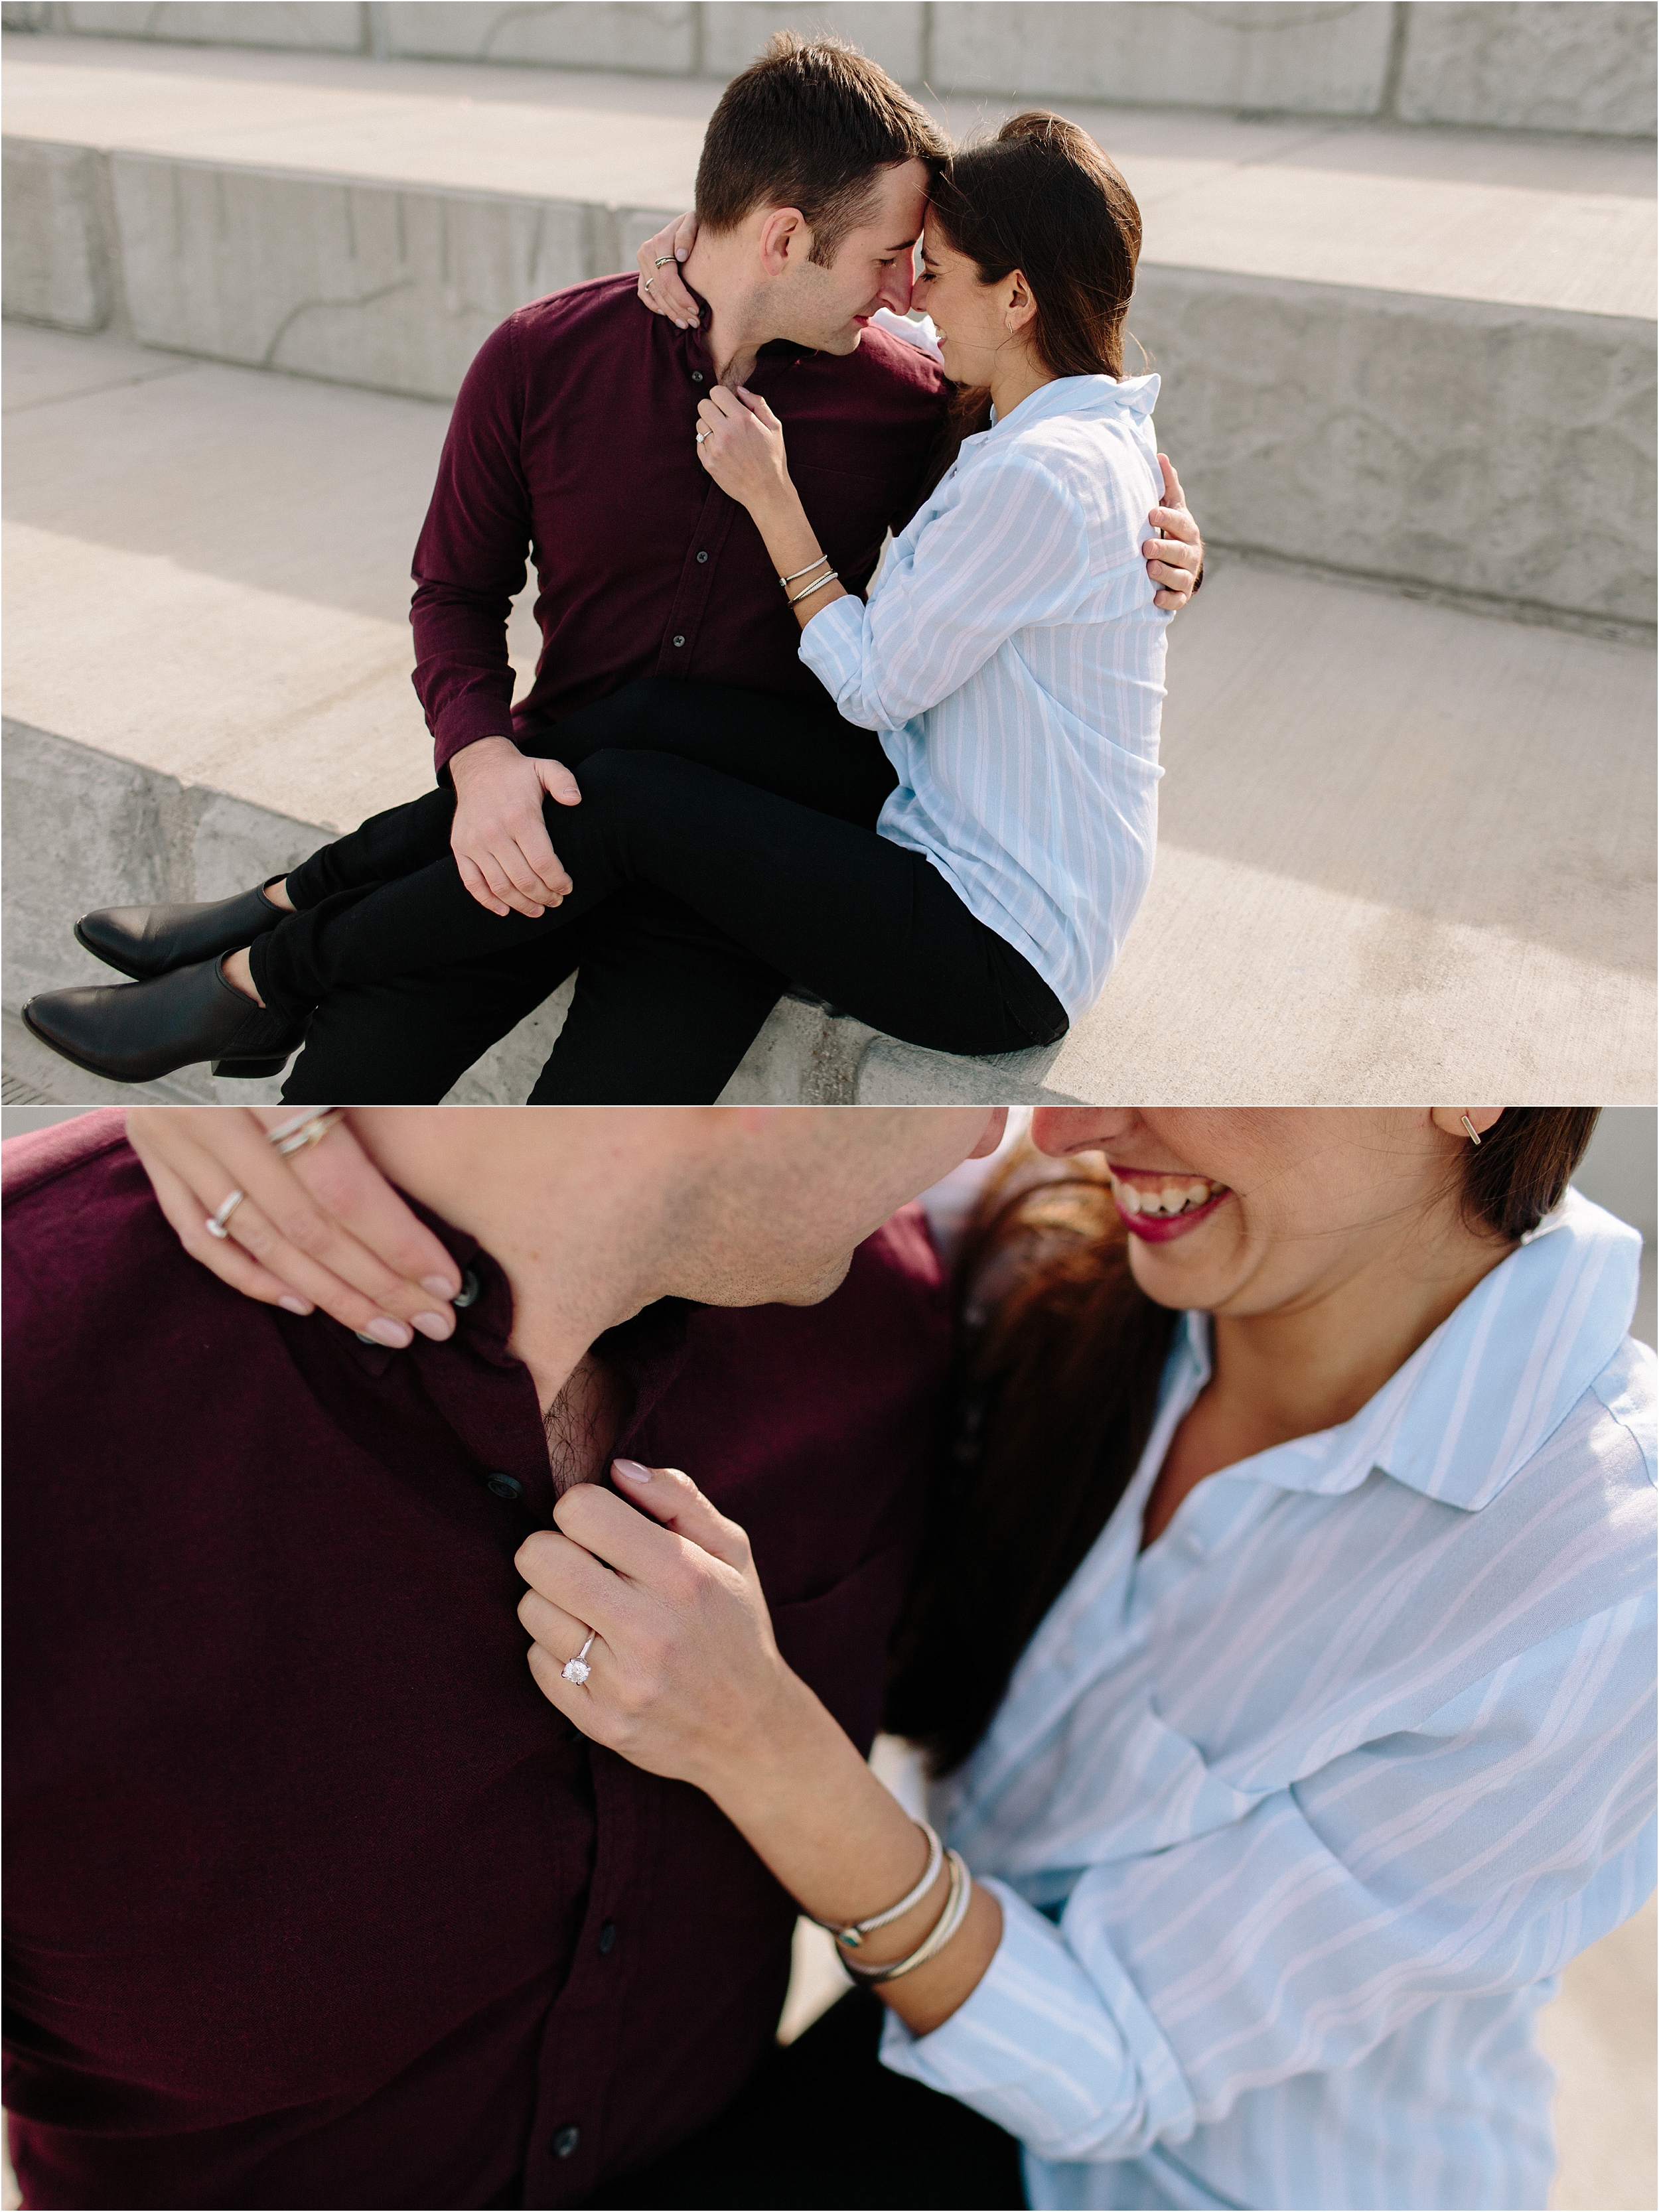 downtown Chicago engagement session